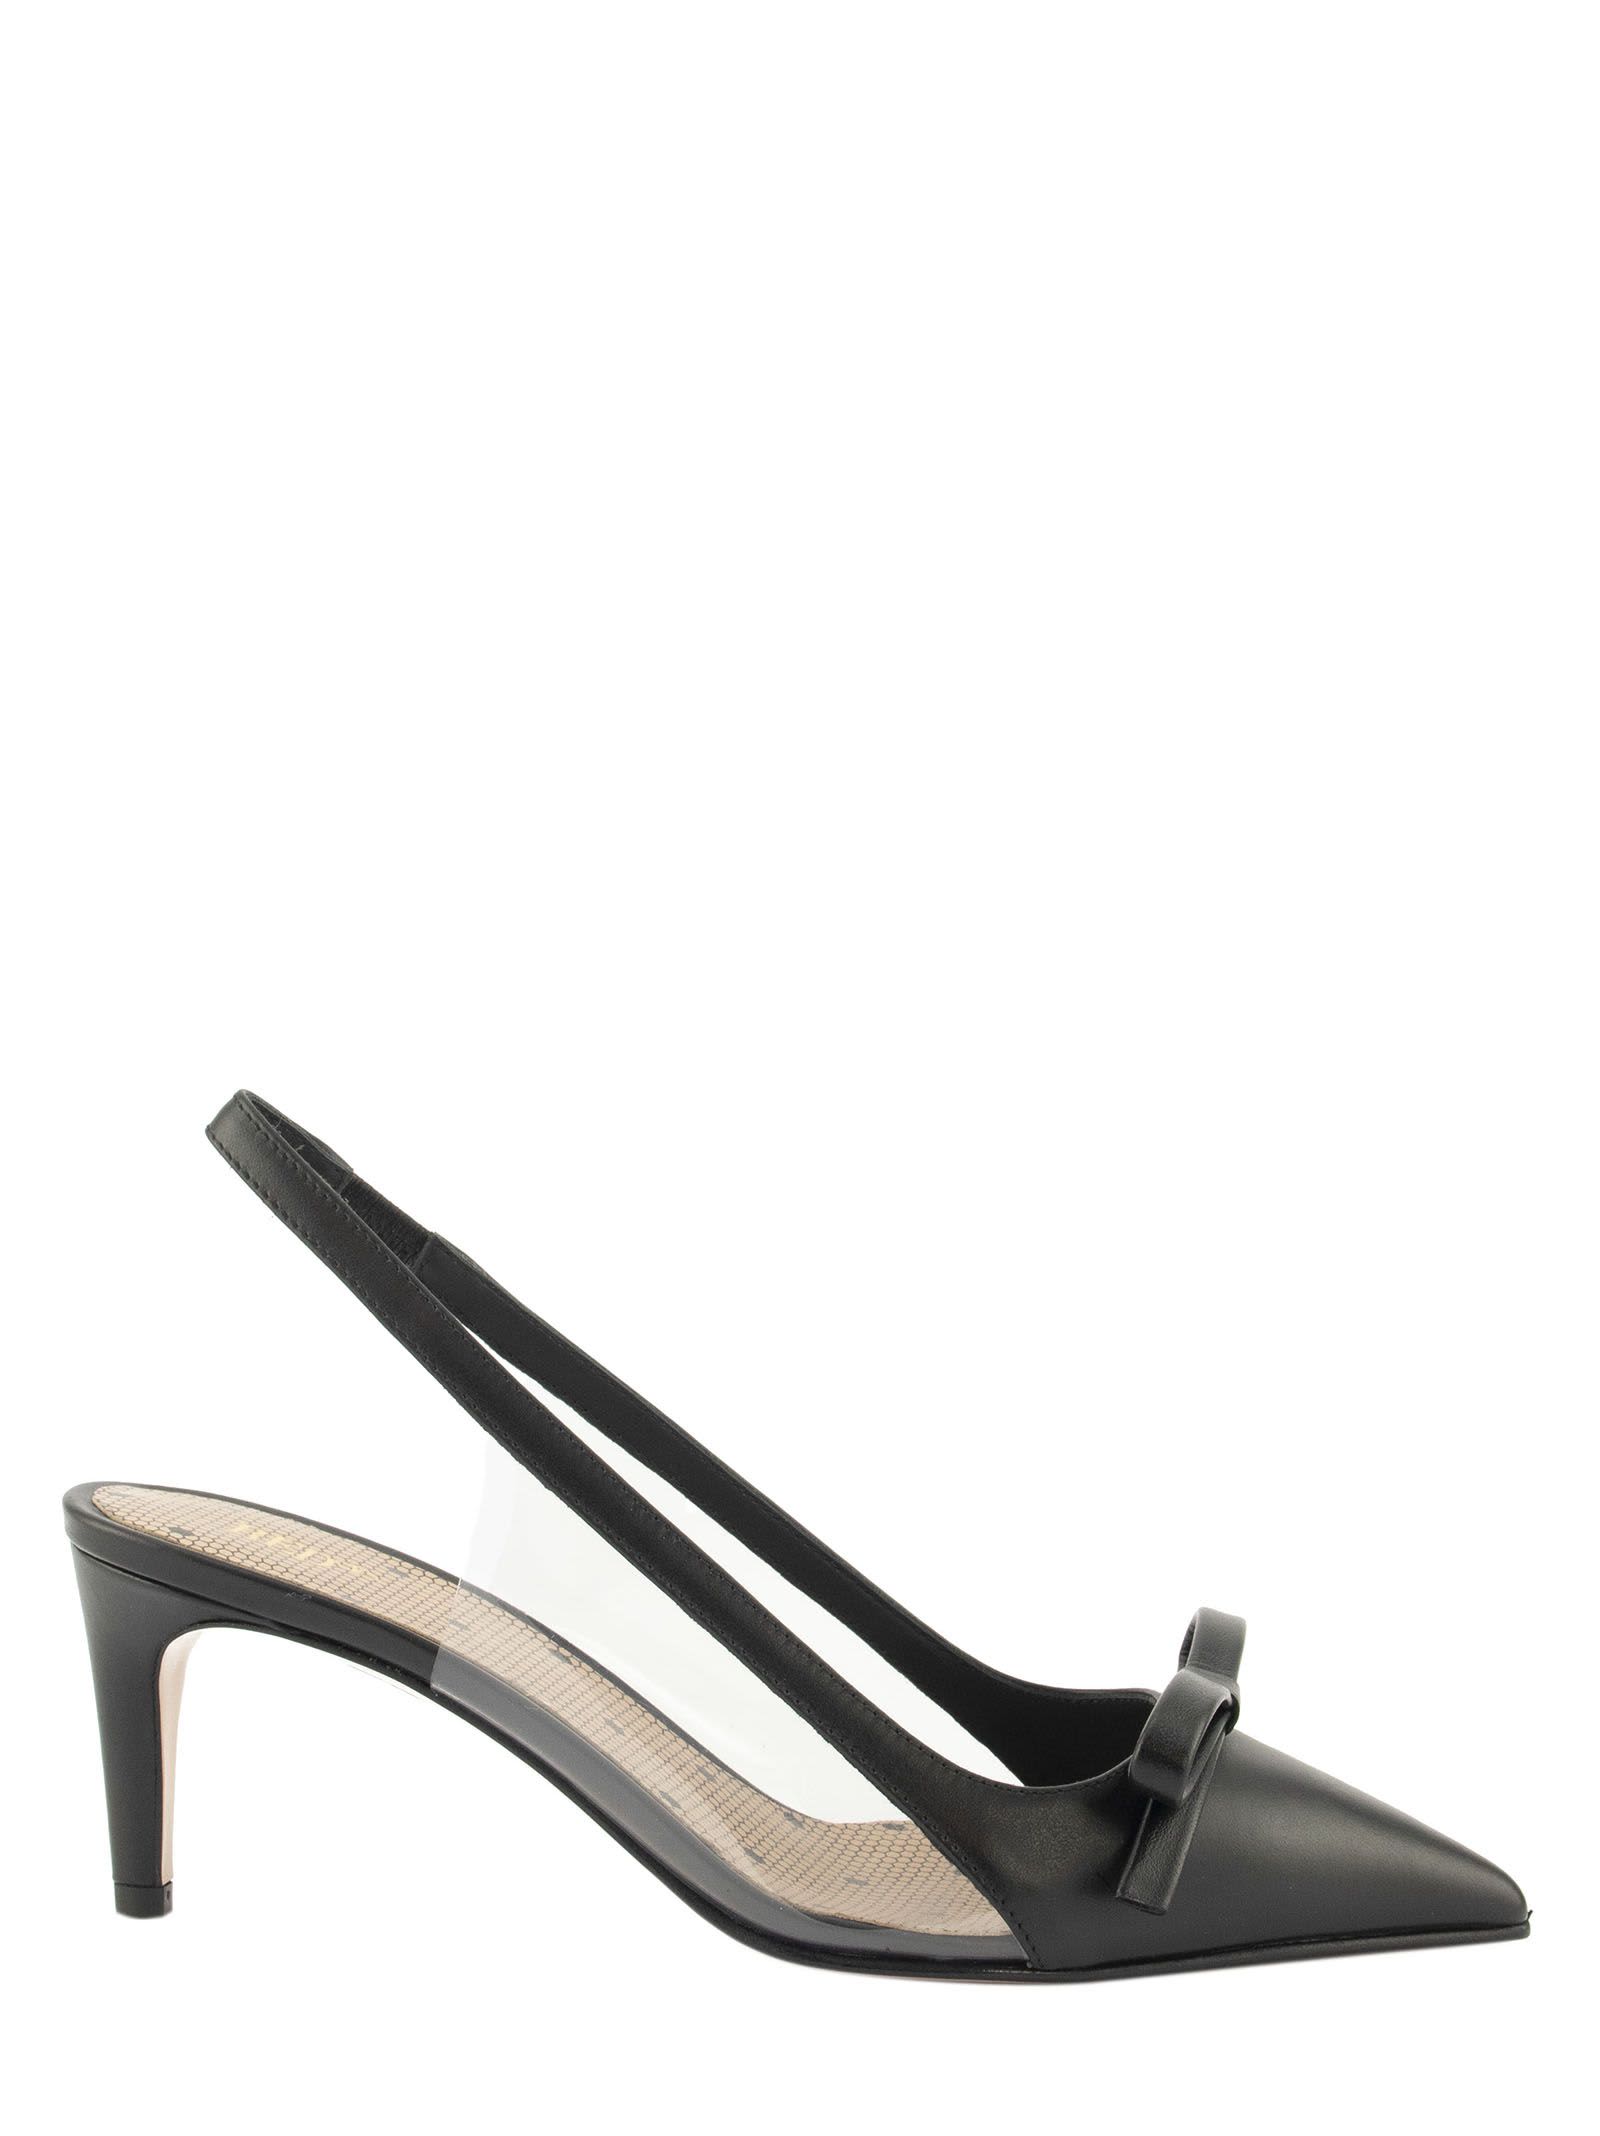 Buy RED Valentino Slingback Pumps Black online, shop RED Valentino shoes with free shipping